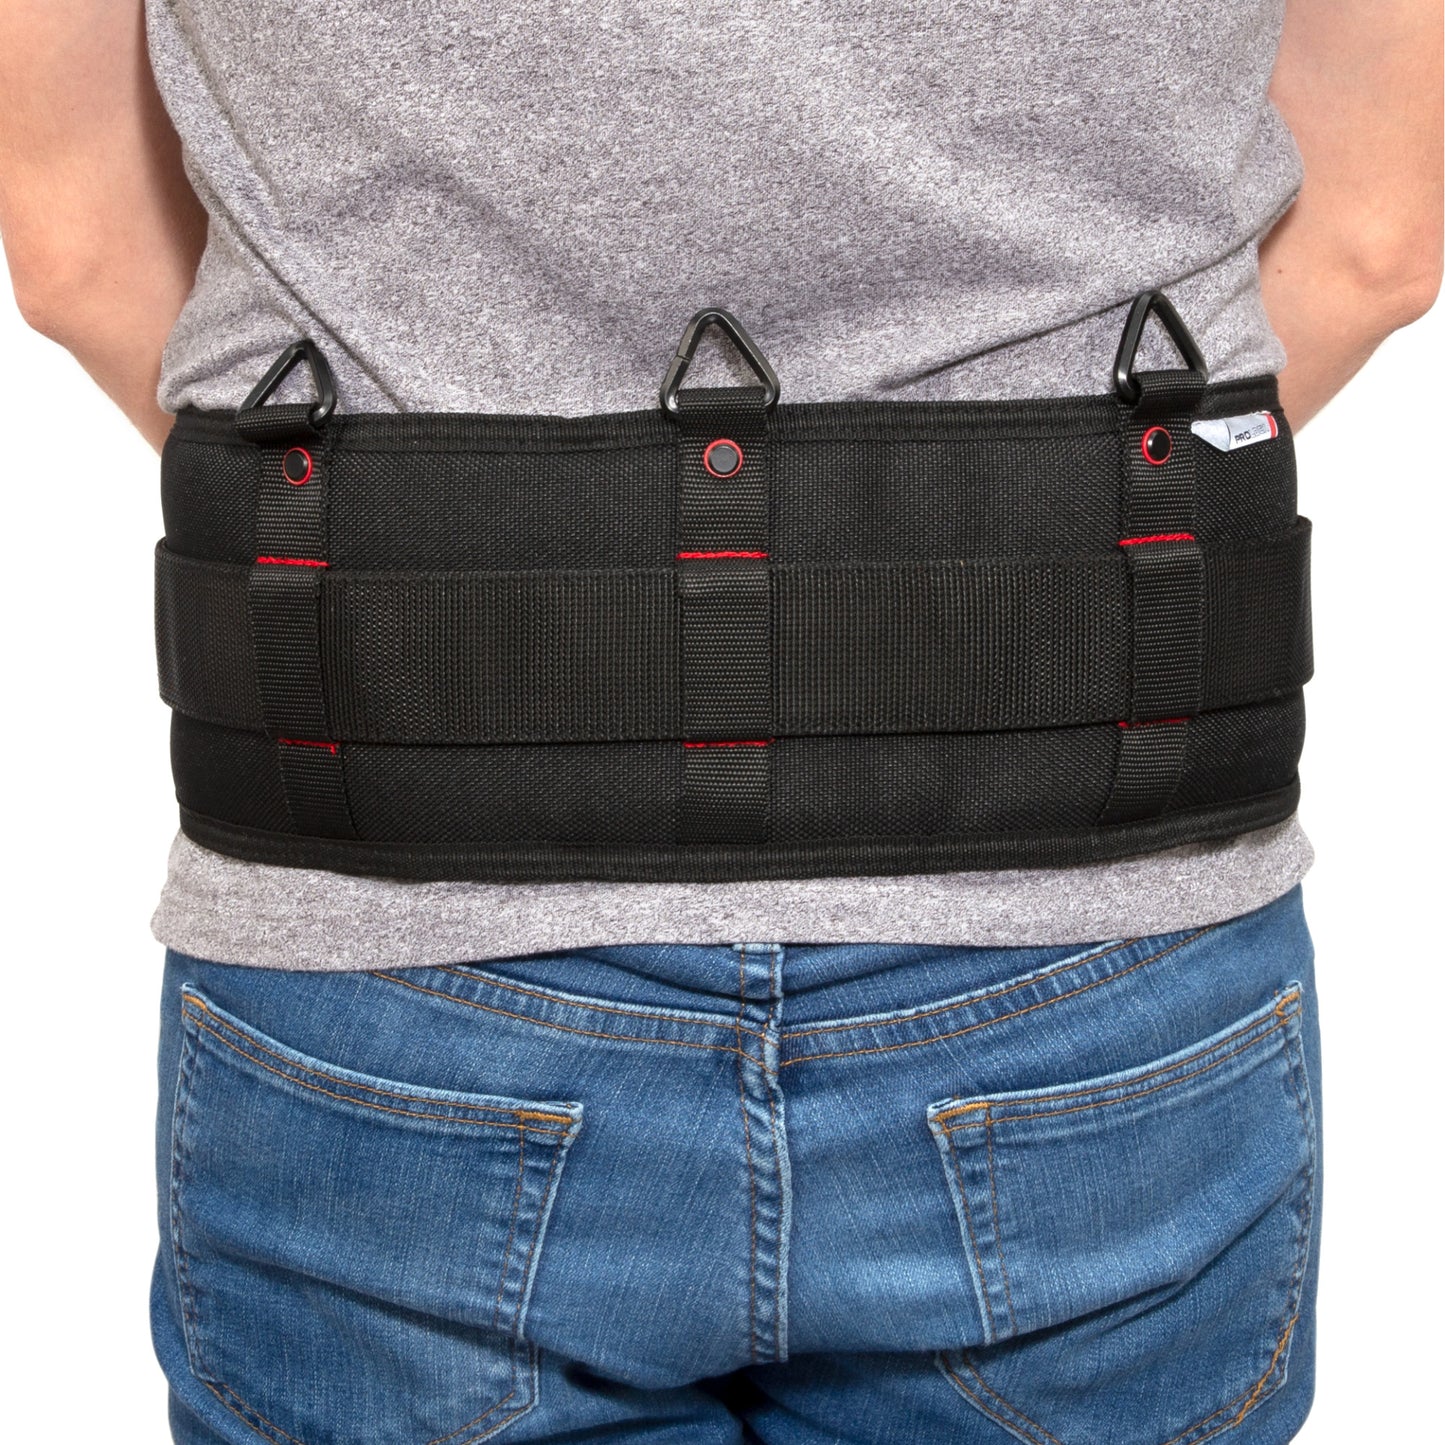 Extra Padded Sling Belt with Quick-Release Buckle